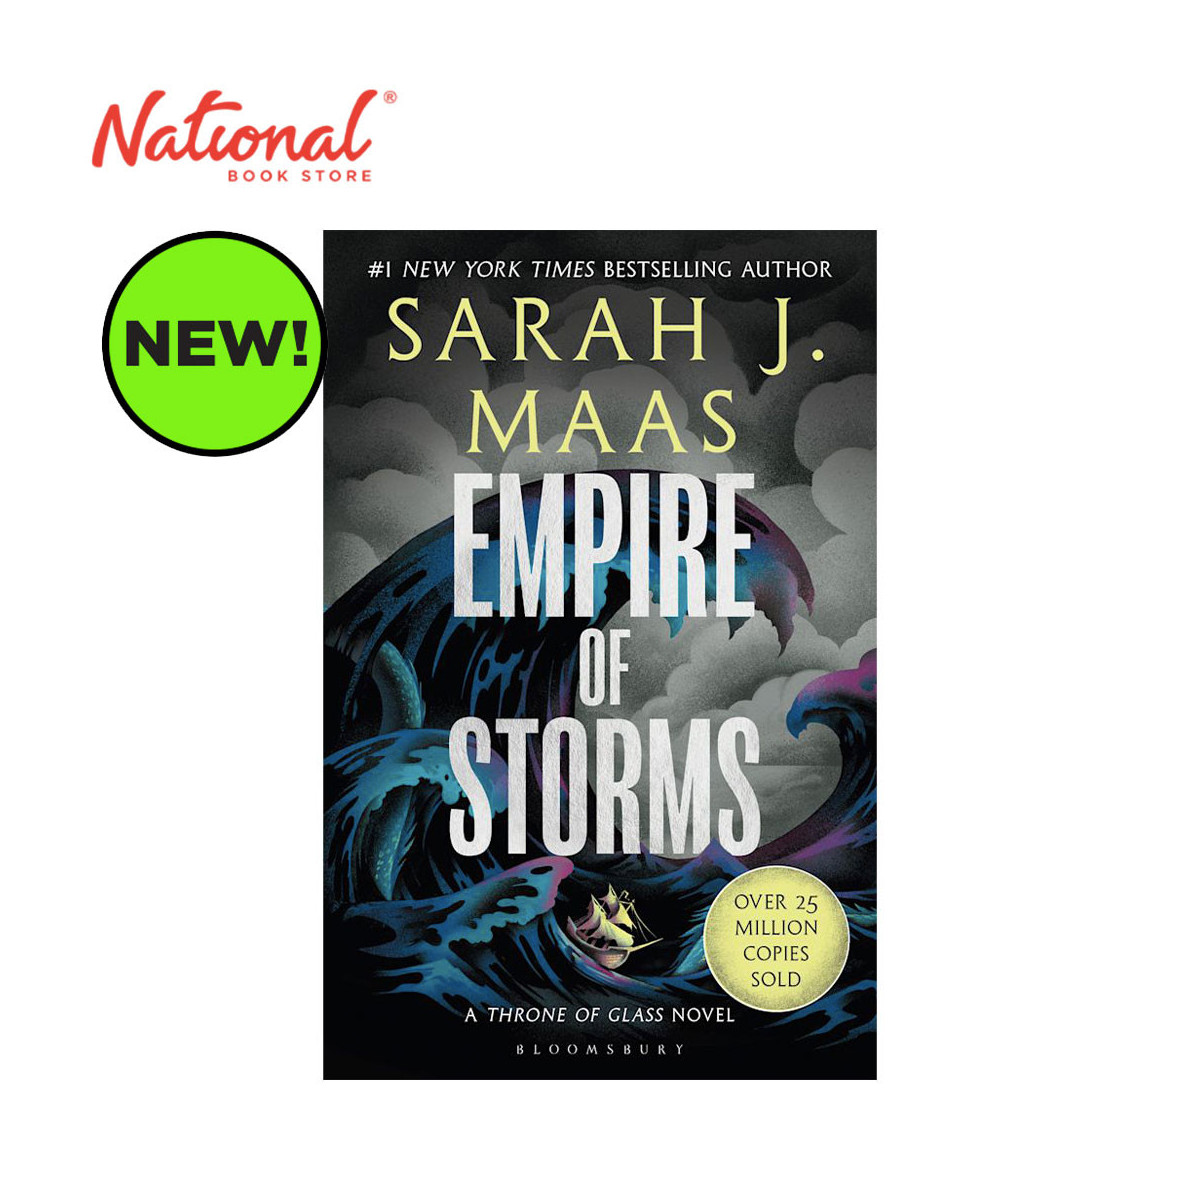 Throne of Glass 5: Empire Of Storms by Sarah J. Maas - Trade Paperback - Sci-Fi - Fantasy - Horror